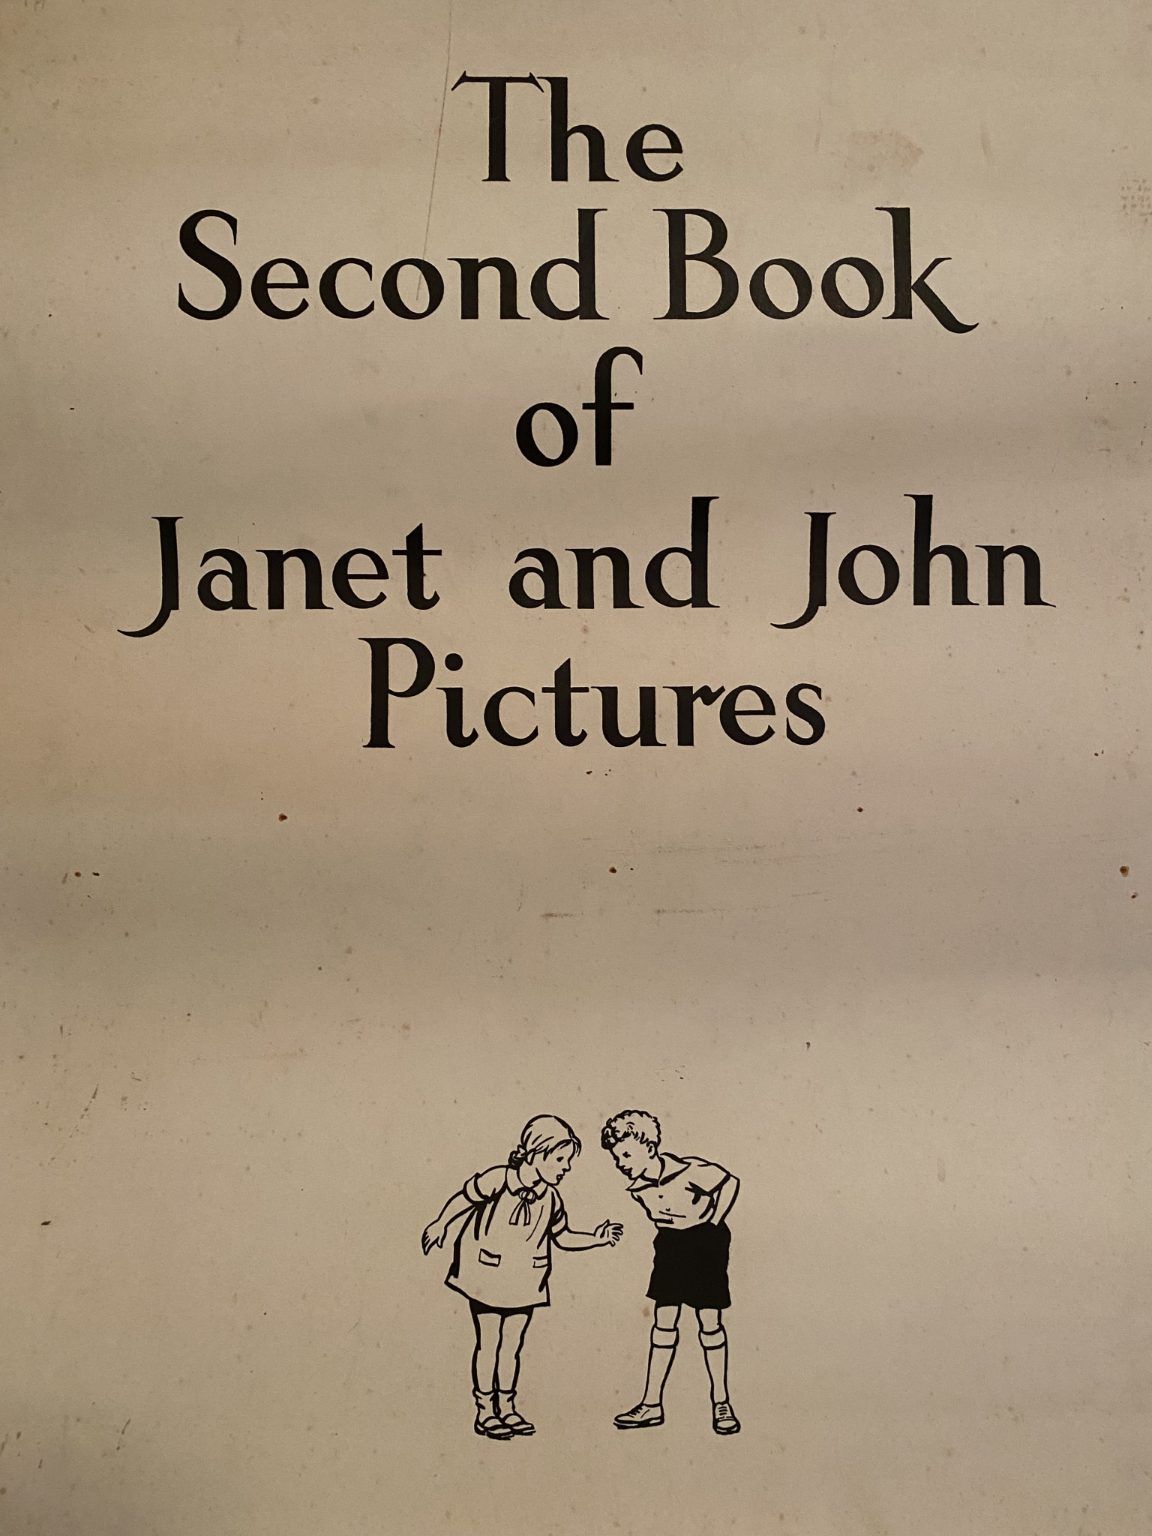 VINTAGE POSTERS: The Second Book of Janet and John Pictures 1950s